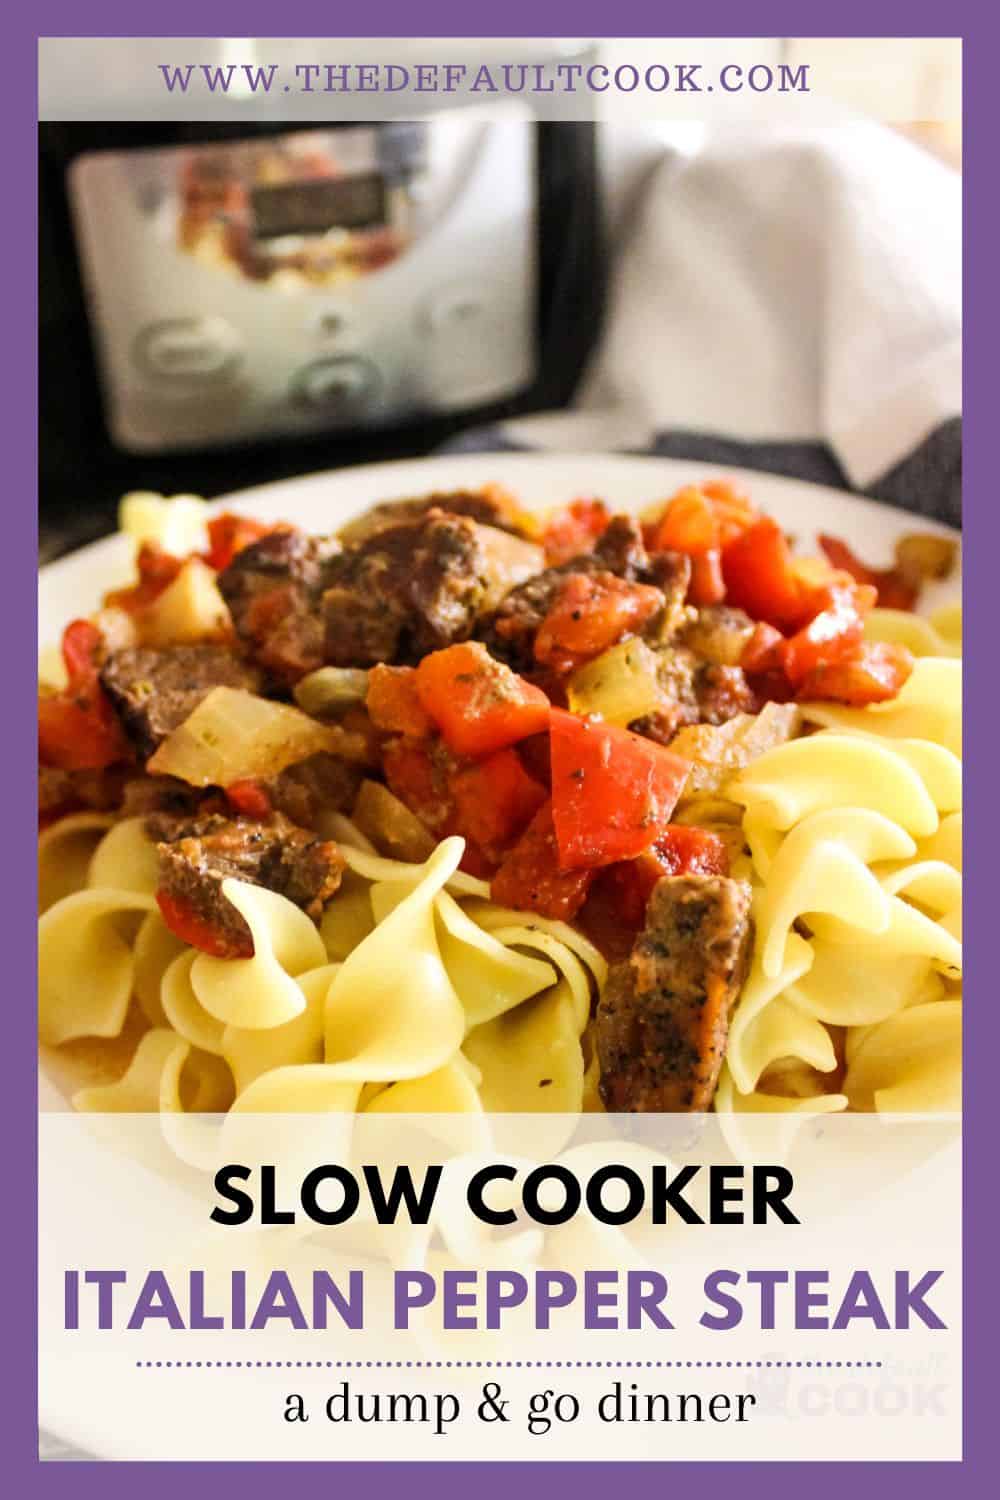 Plate of Italian pepper steak on a bed of egg noodles in front of slow cooker with title text in front.